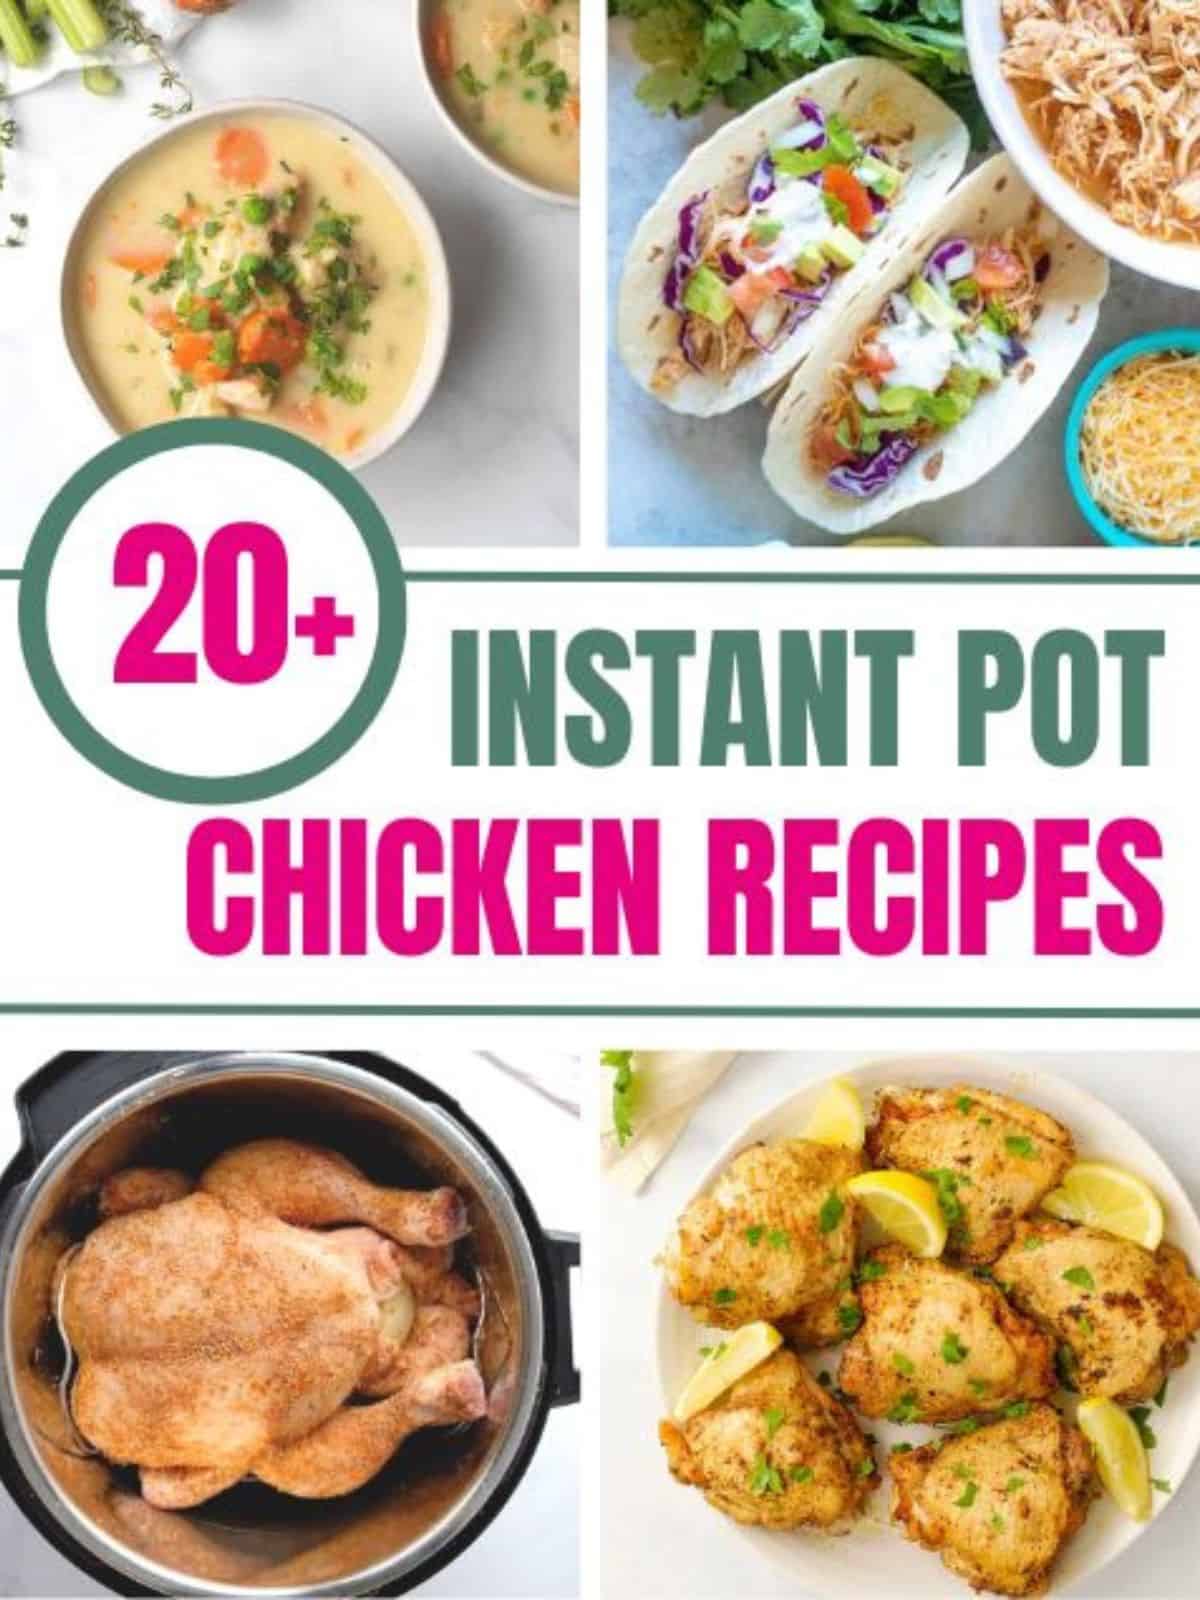 Collage of Instant Pot Chicken Recipes with text that reads Over 20 Instant Pot Chicken Recipes.